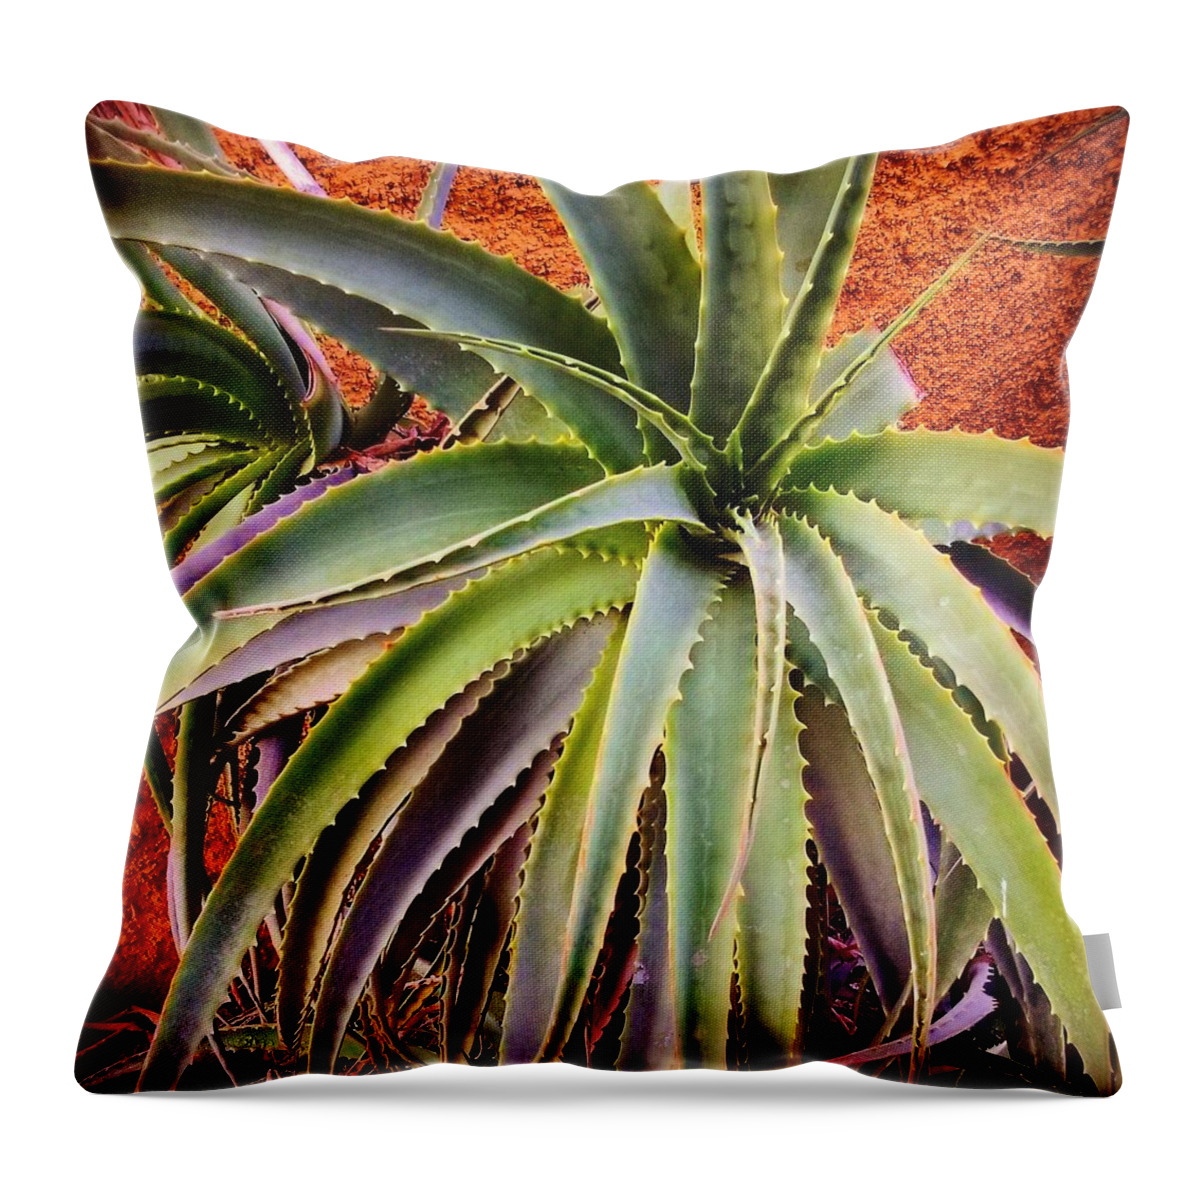  Throw Pillow featuring the photograph Aloe Vera by JLmorales